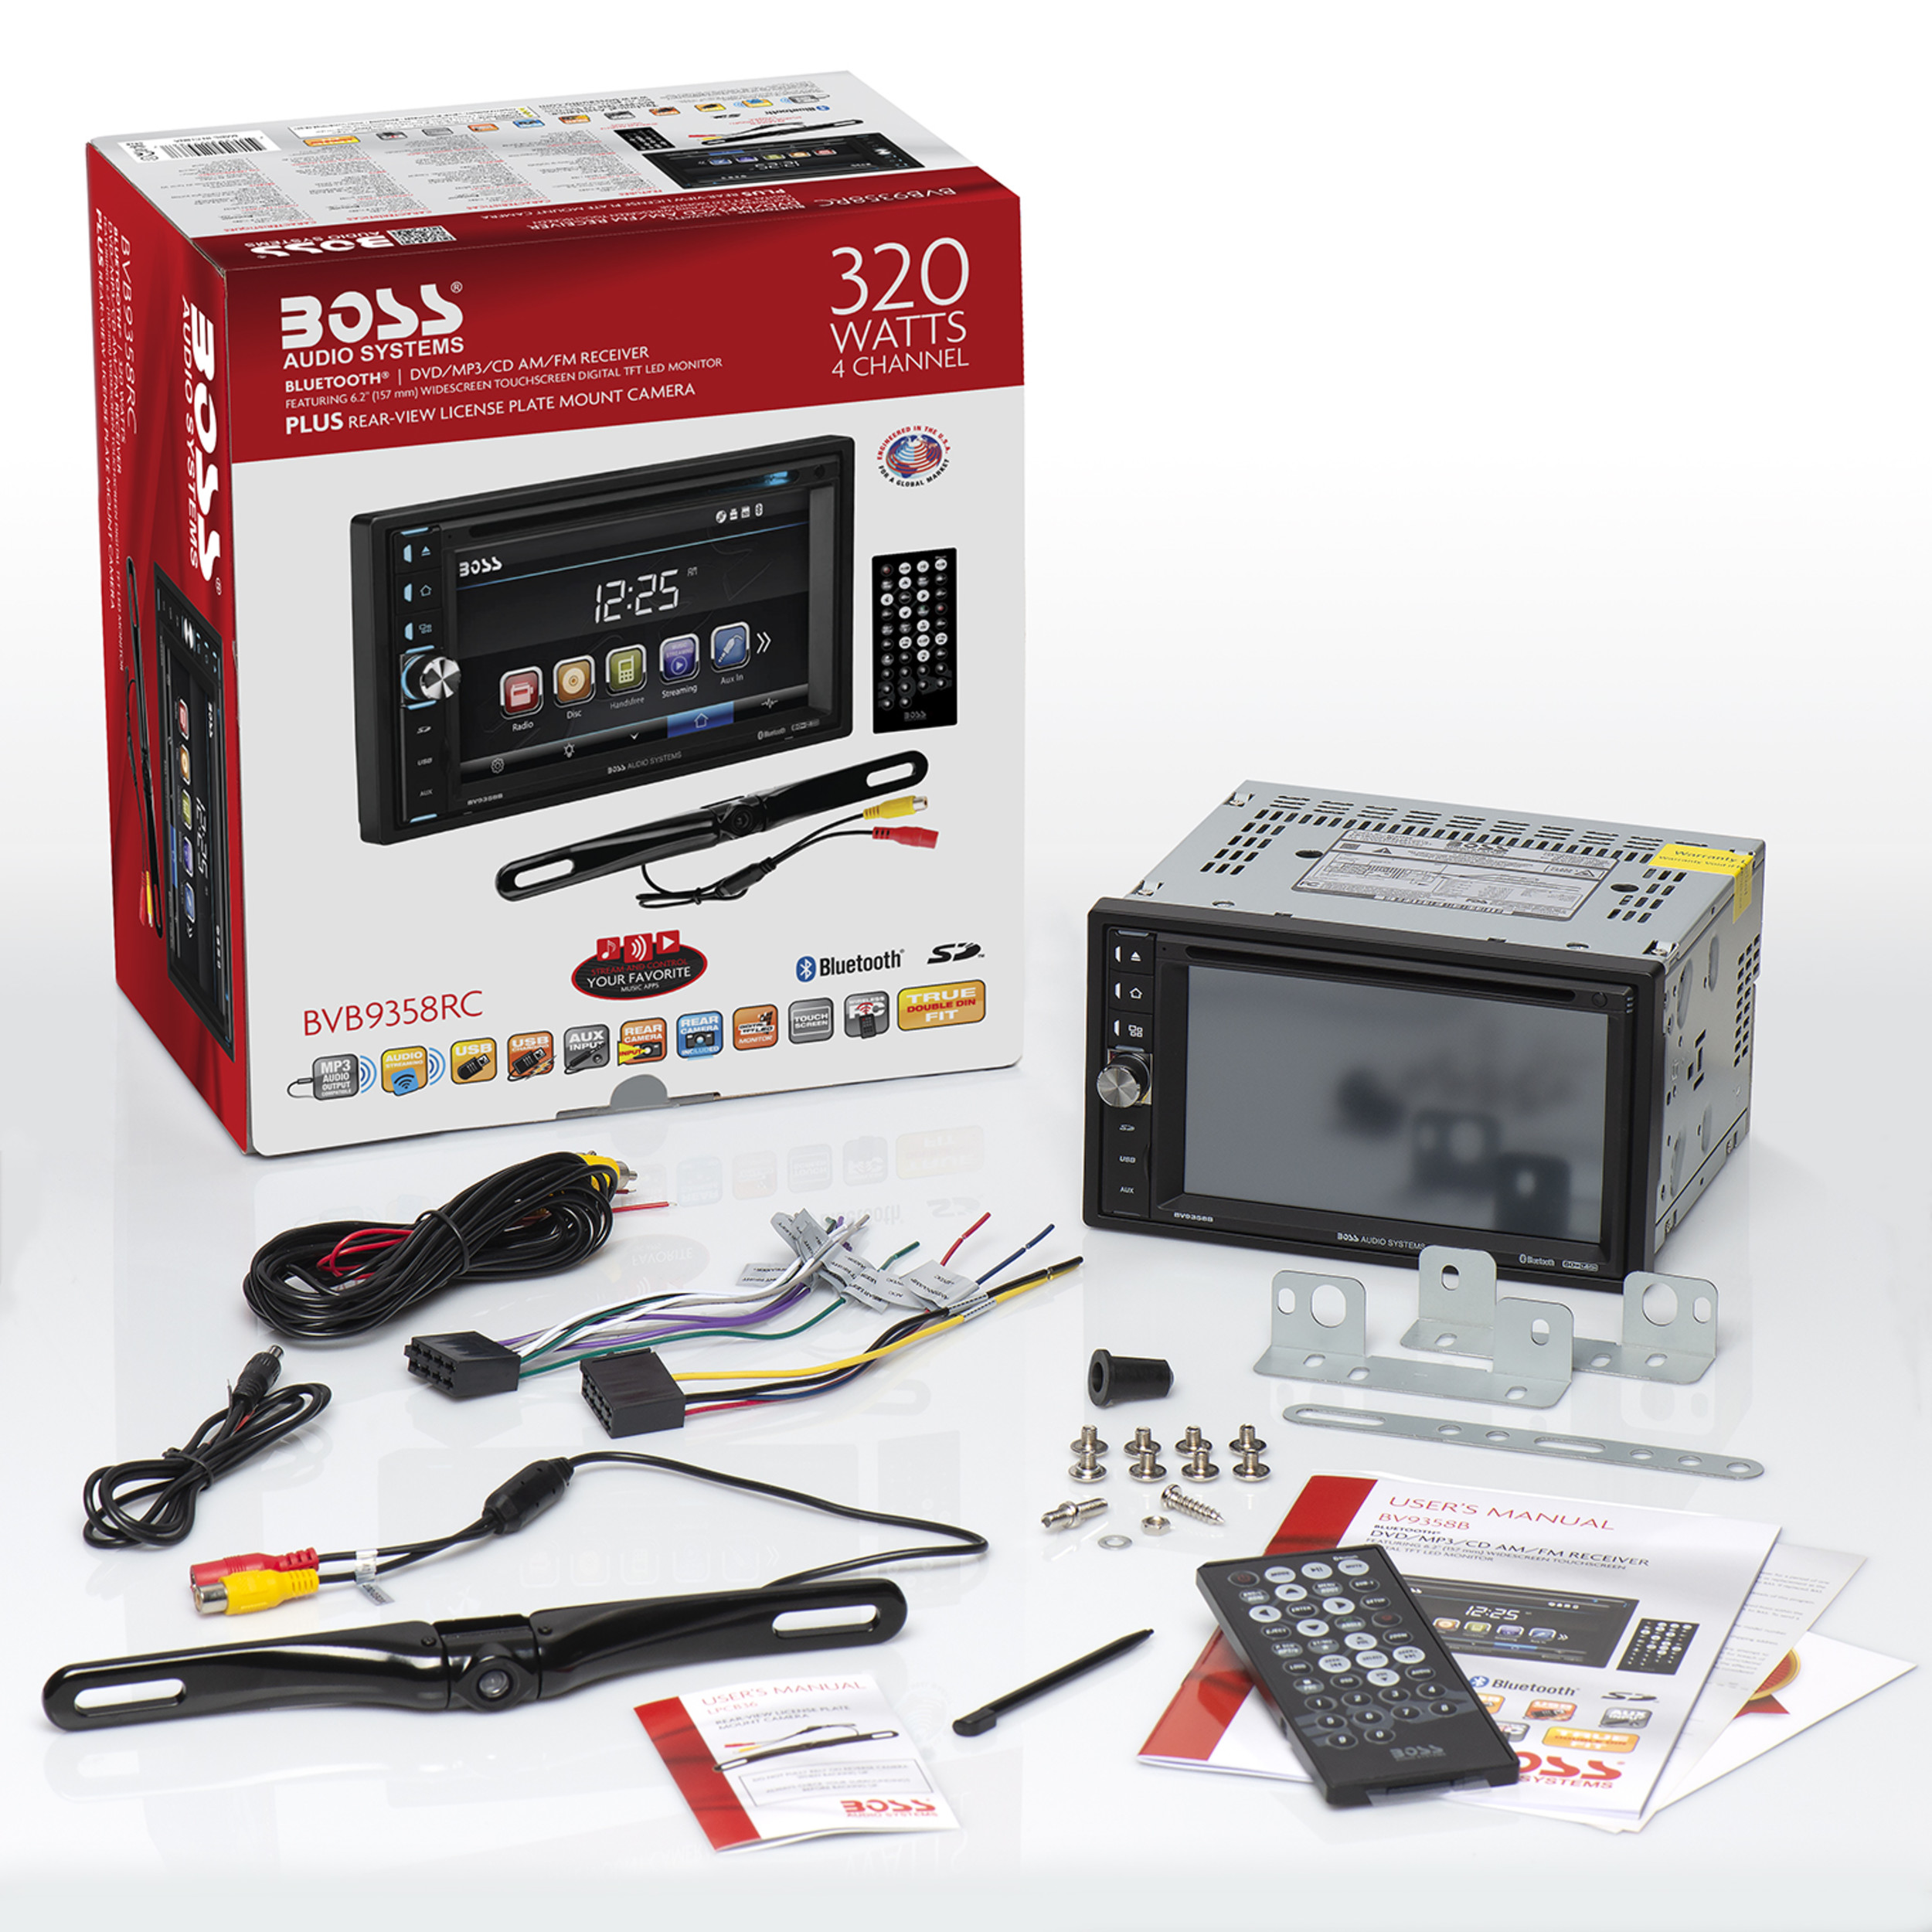 BOSS Audio Systems BVB9358RC Car DVD Player, Rearview Camera, Bluetooth 6.2” LCD - image 5 of 15